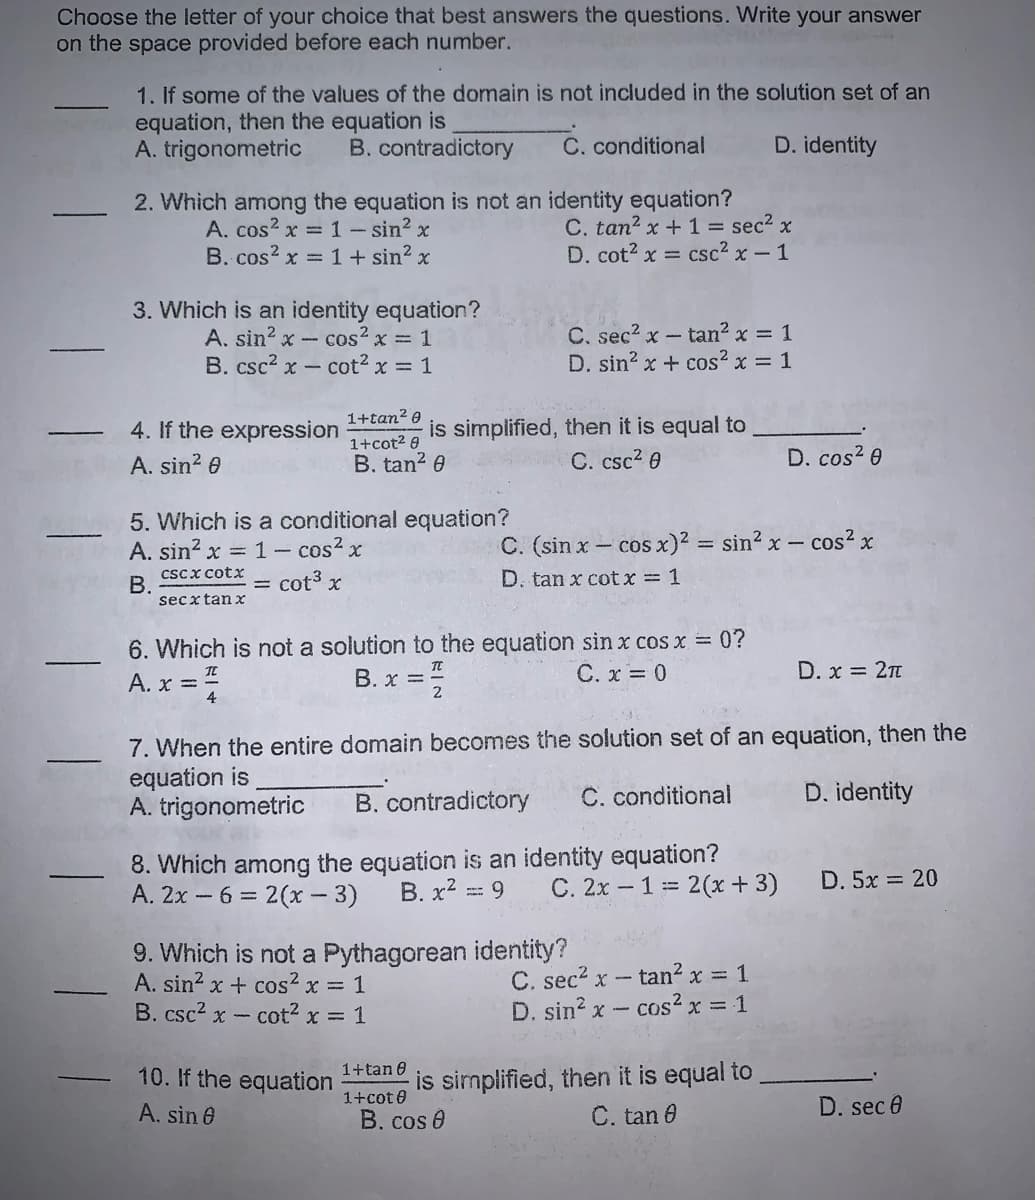 Choose the letter of your choice that best answers the questions. Write your answer
on the space provided before each number.
1. If some of the values of the domain is not included in the solution set of an
equation, then the equation is
A. trigonometric
B. contradictory
C. conditional
D. identity
2. Which among the equation is not an identity equation?
C. tan2 x+ 1 = sec2 x
D. cot? x = csc2 x-1
A. cos? x = 1 - sin? x
B. cos? x = 1 + sin? x
3. Which is an identity equation?
A. sin? x - cos? x = 1
B. csc2 x - cot2 x = 1
C. sec2 x- tan2 x = 1
D. sin? x + cos? x = 1
1+tan? 0
is simplified, then it is equal to
C. csc? 0
4. If the expression
1+cot2 8
A. sin? 0
B. tan? 0
D. cos? 0
5. Which is a conditional equation?
A. sin? x = 1- cos? x
C. (sin x - cos x)2 = sin? x-
x-cos? x
cscx cotx
В.
secxtan x
cot3 x
D. tan x cotx = 1
%3D
6. Which is not a solution to the equation sin x cos x 0?
A. x ==
B. x =
C. x = 0
D. x = 2T
7. When the entire domain becomes the solution set of an equation, then the
equation is
A. trigonometric
B. contradictory
C. conditional
D. identity
8. Which among the equation is an identity equation?
B. x2 ==
A. 2x - 6 = 2(x - 3)
C. 2x - 1= 2(x + 3)
D. 5x 20
9. Which is not a Pythagorean identity?
A. sin2 x + cos2 x = 1
B. csc2 x - cot2 x = 1
C. sec? x - tan² x = 1
D. sin? x - cos² x = 1
is simplified, then it is equal to
1+cot 0
1+tan 0
10. If the equation
A. sin 0
B. cos 0
C. tan 0
D. sec 0
